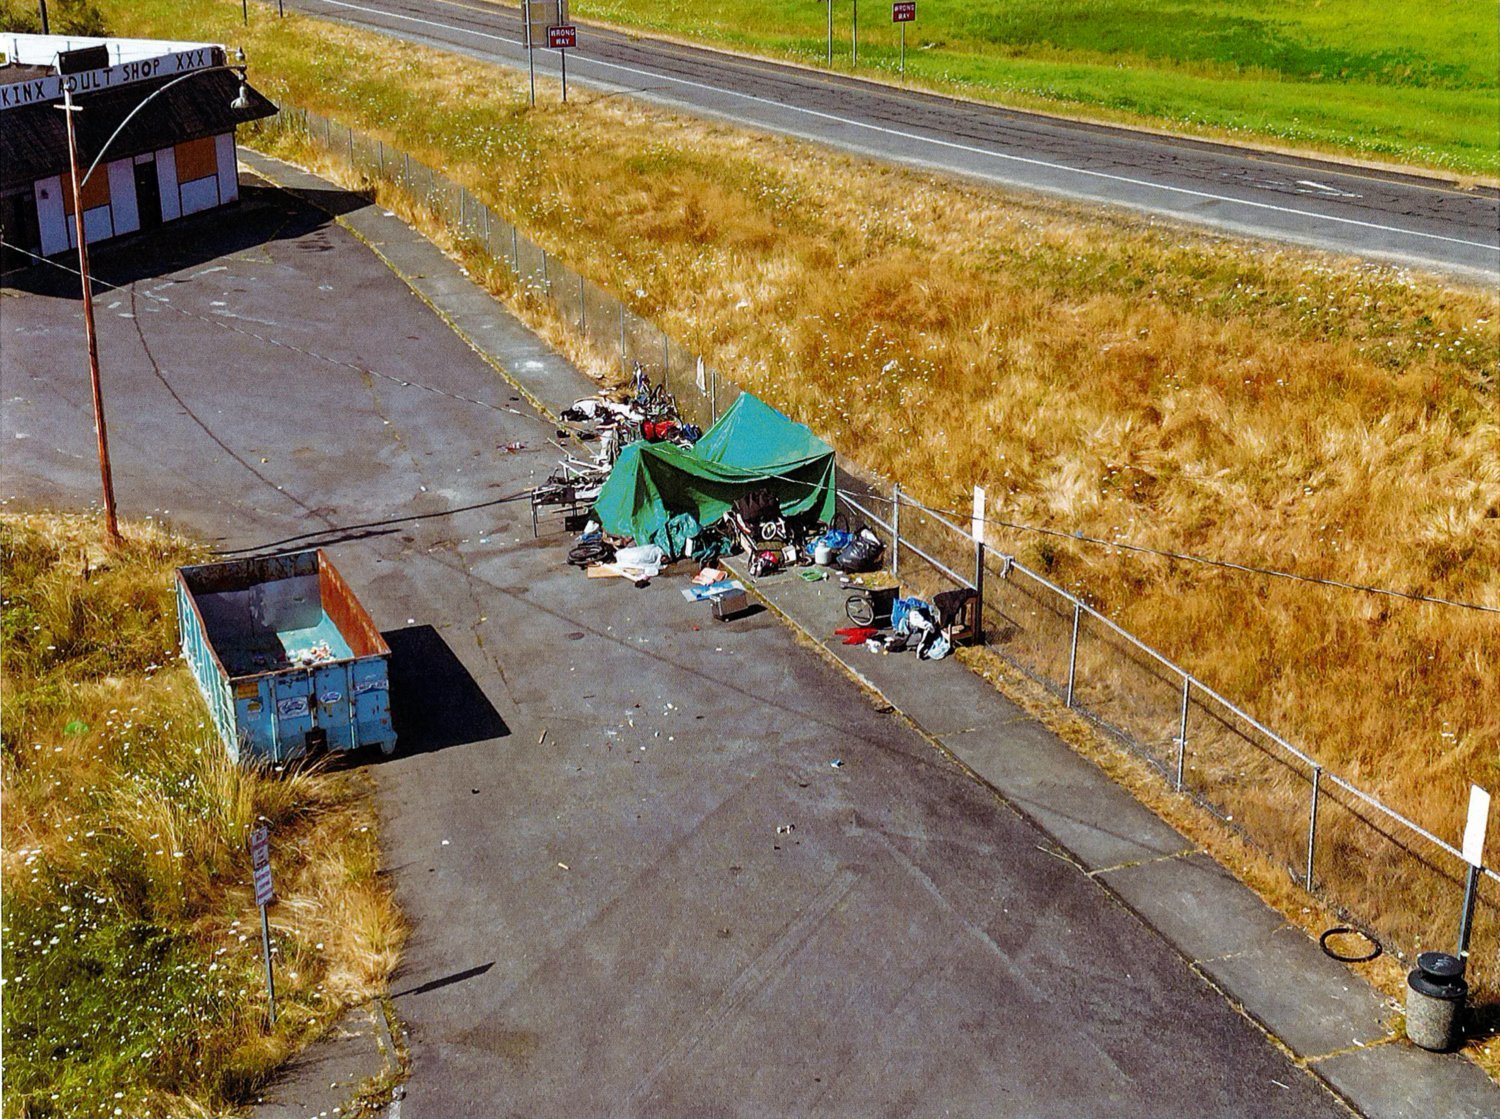 The homeless encampment was located on private property near the park and ride on Main Street in Chehalis, next to Interstate 5 Exit 77.